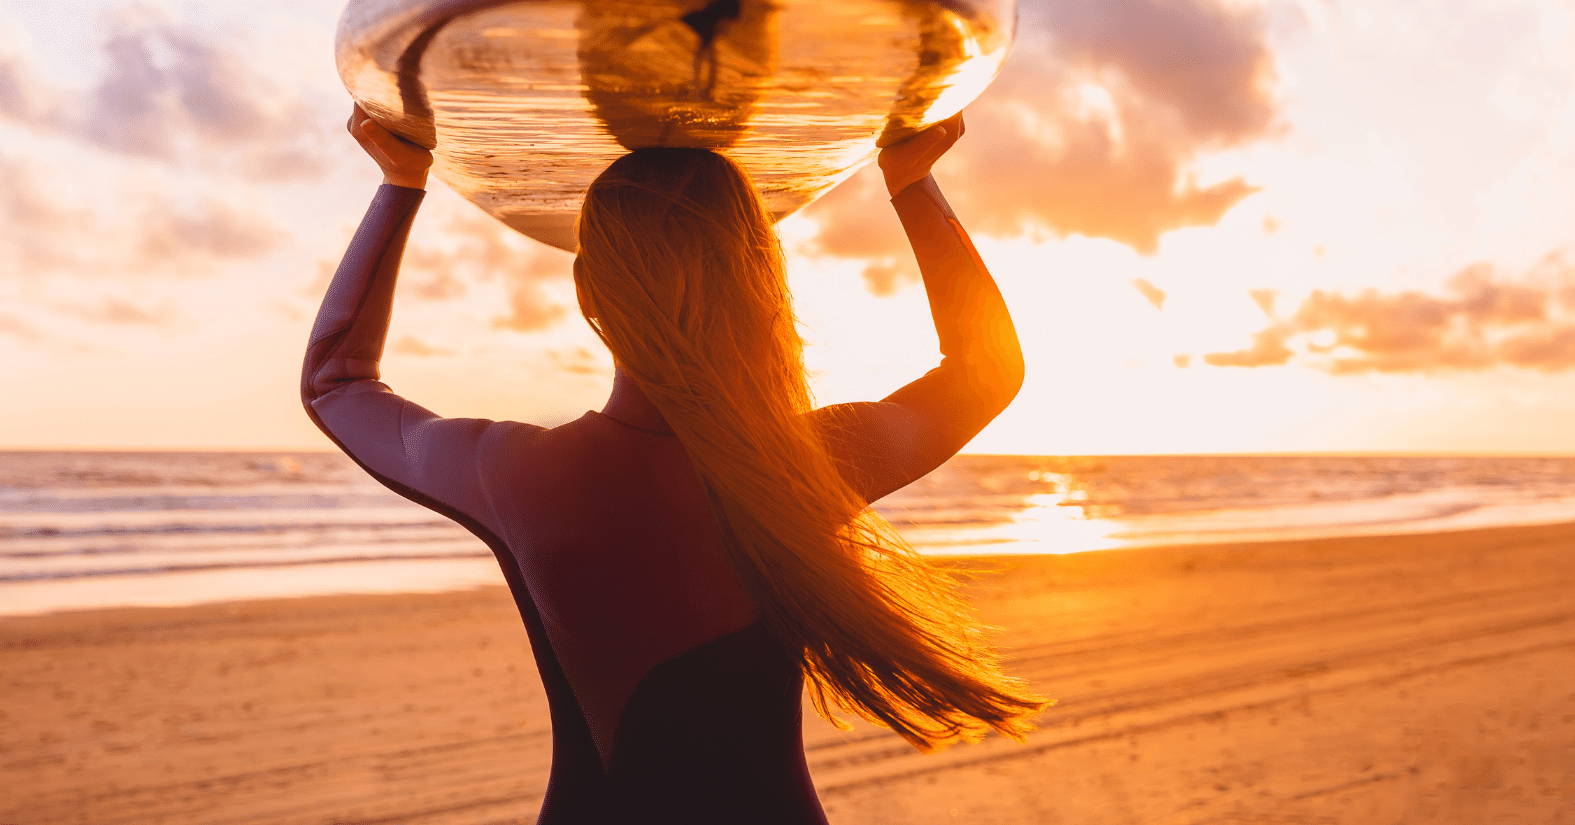 5 Tips to perfect summer hair